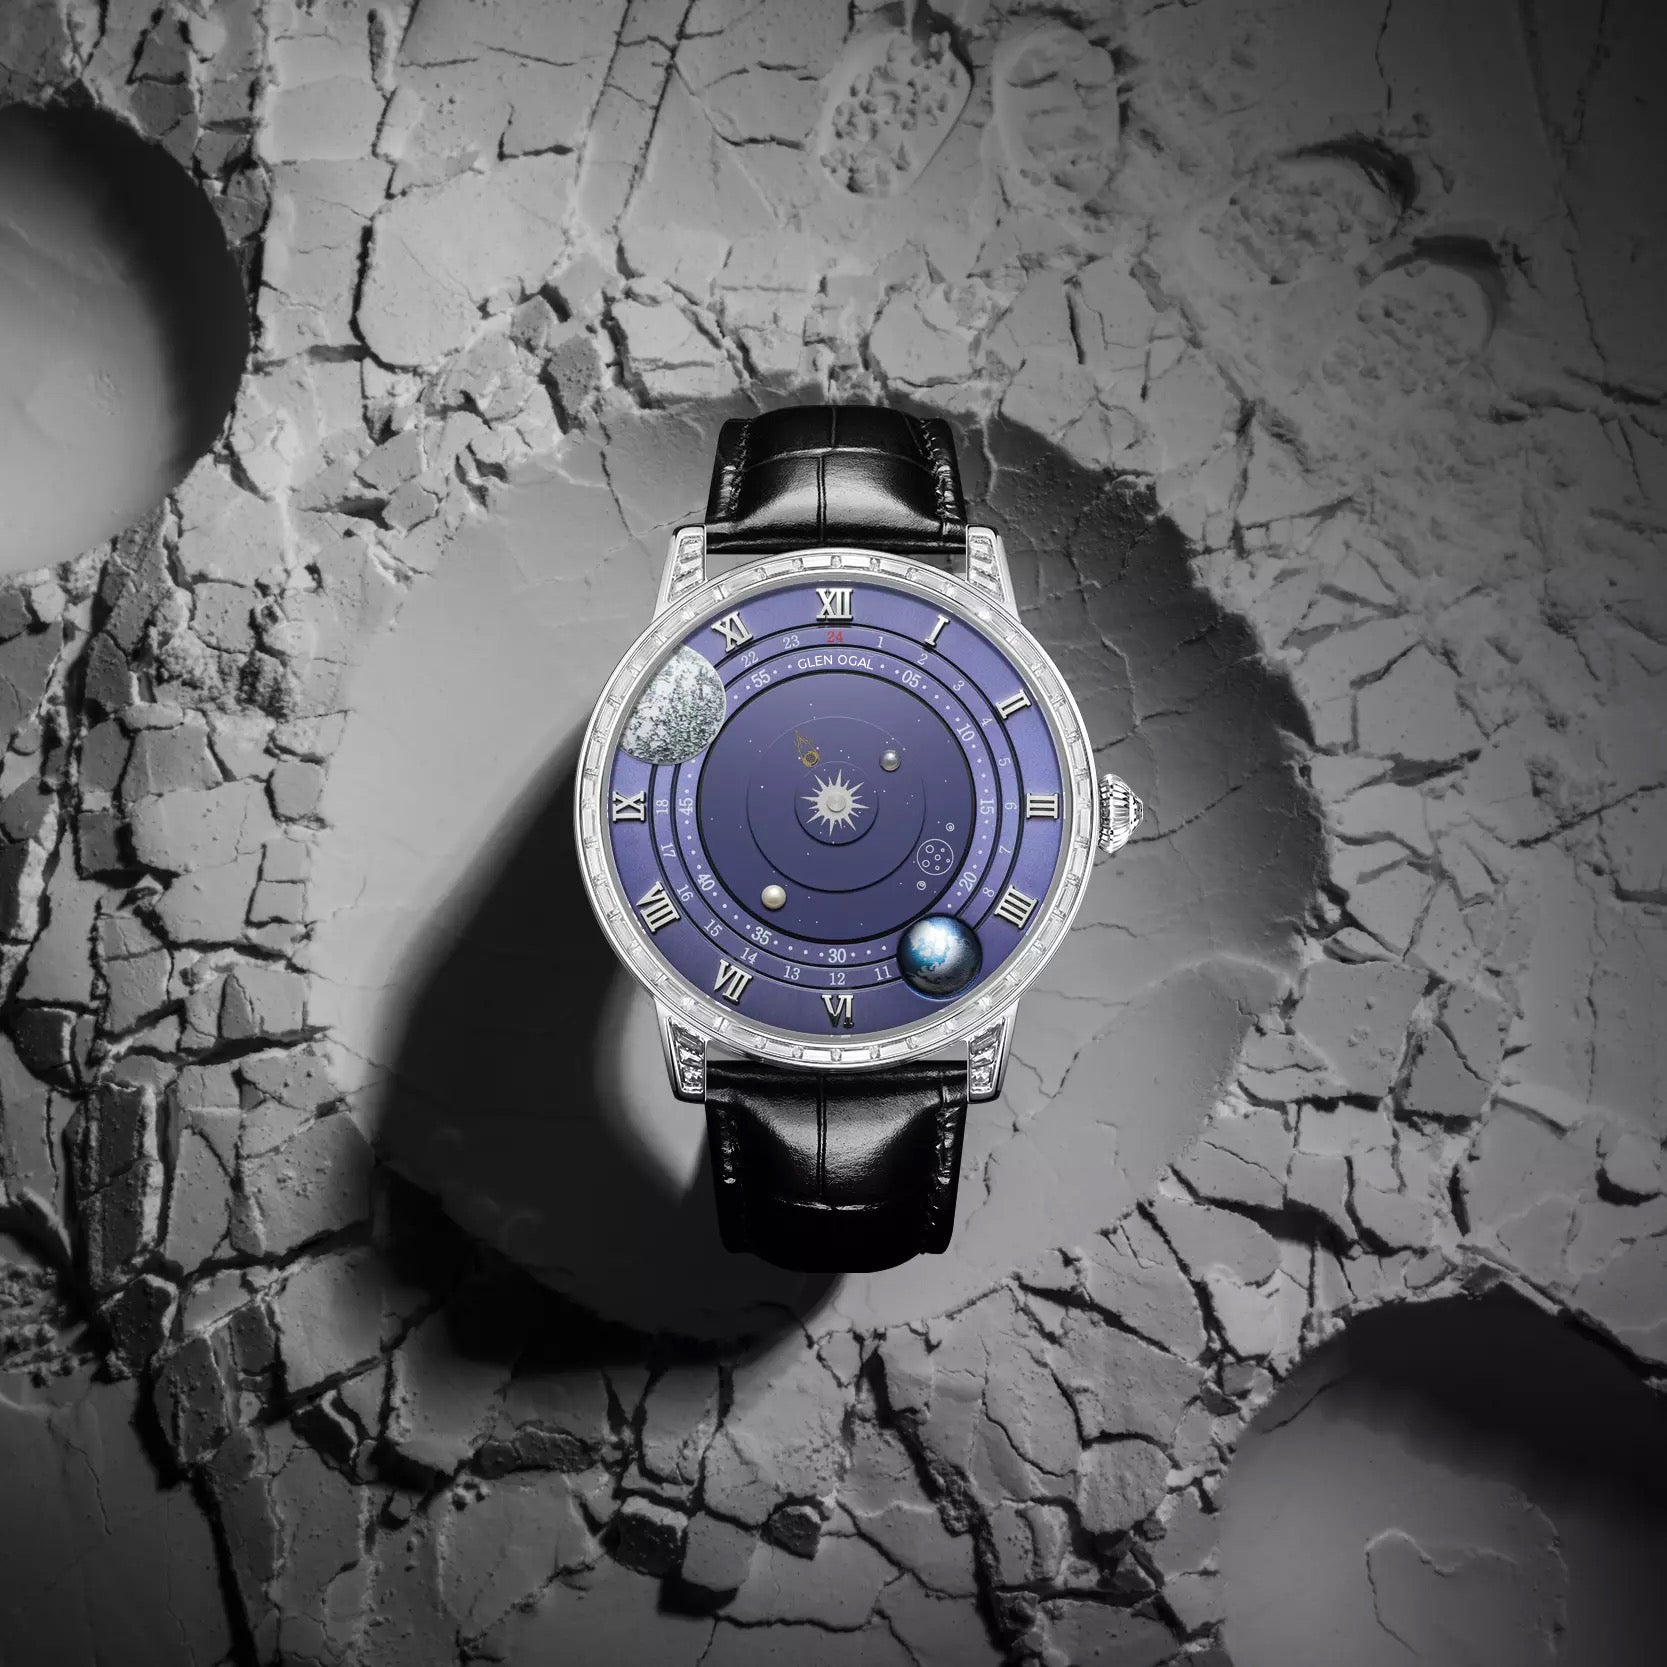 These astronomical watches take celestial timekeeping to another dimension  | Lifestyle Asia Singapore